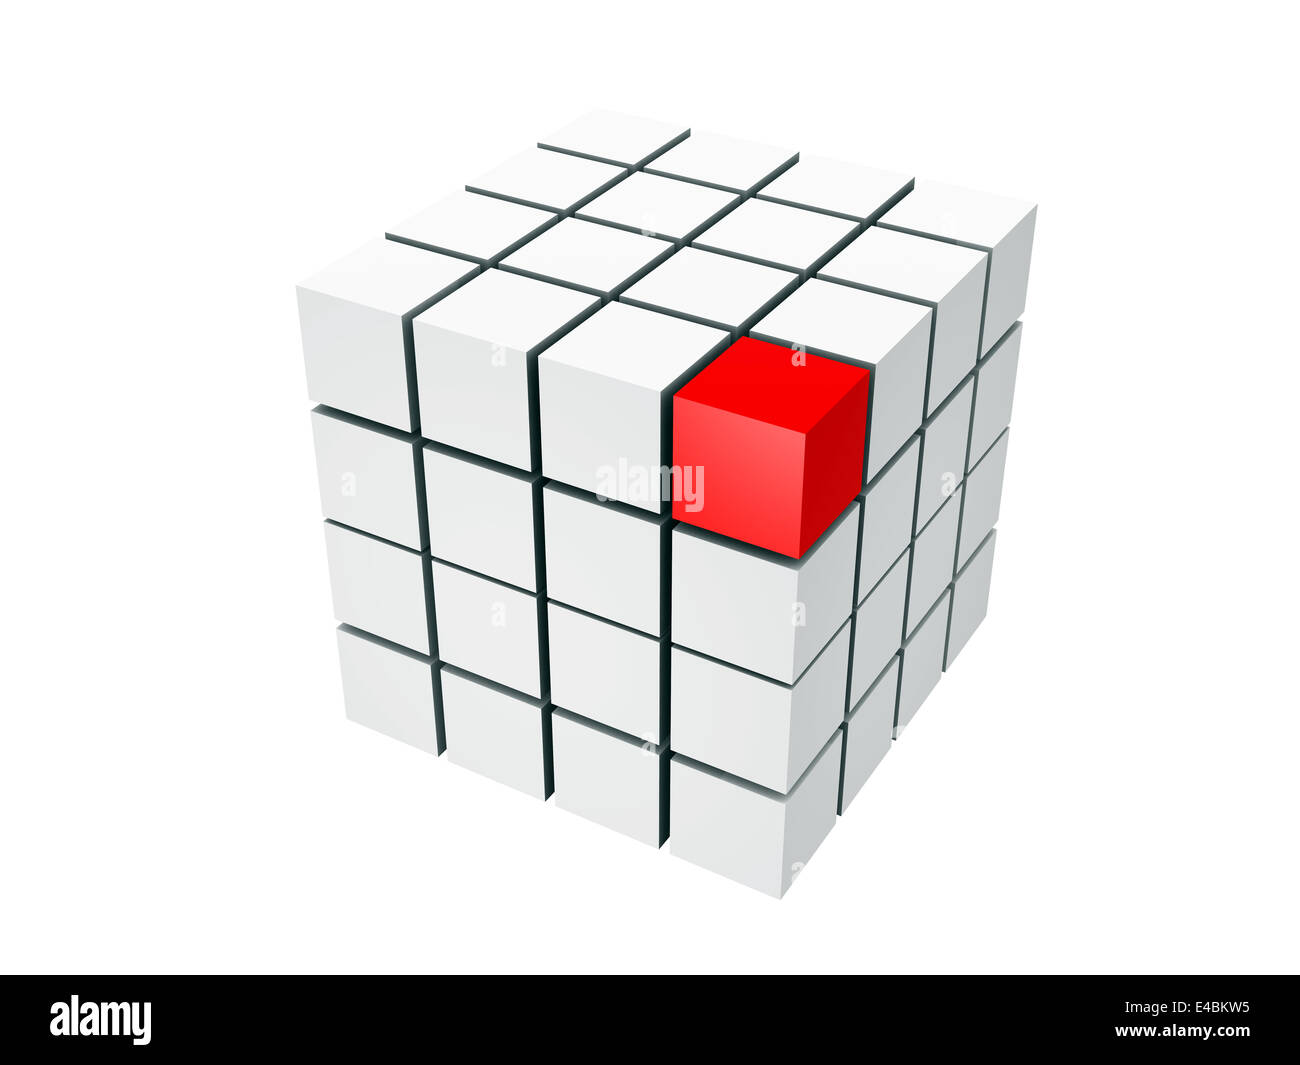 well-organized located group of cubes Stock Photo